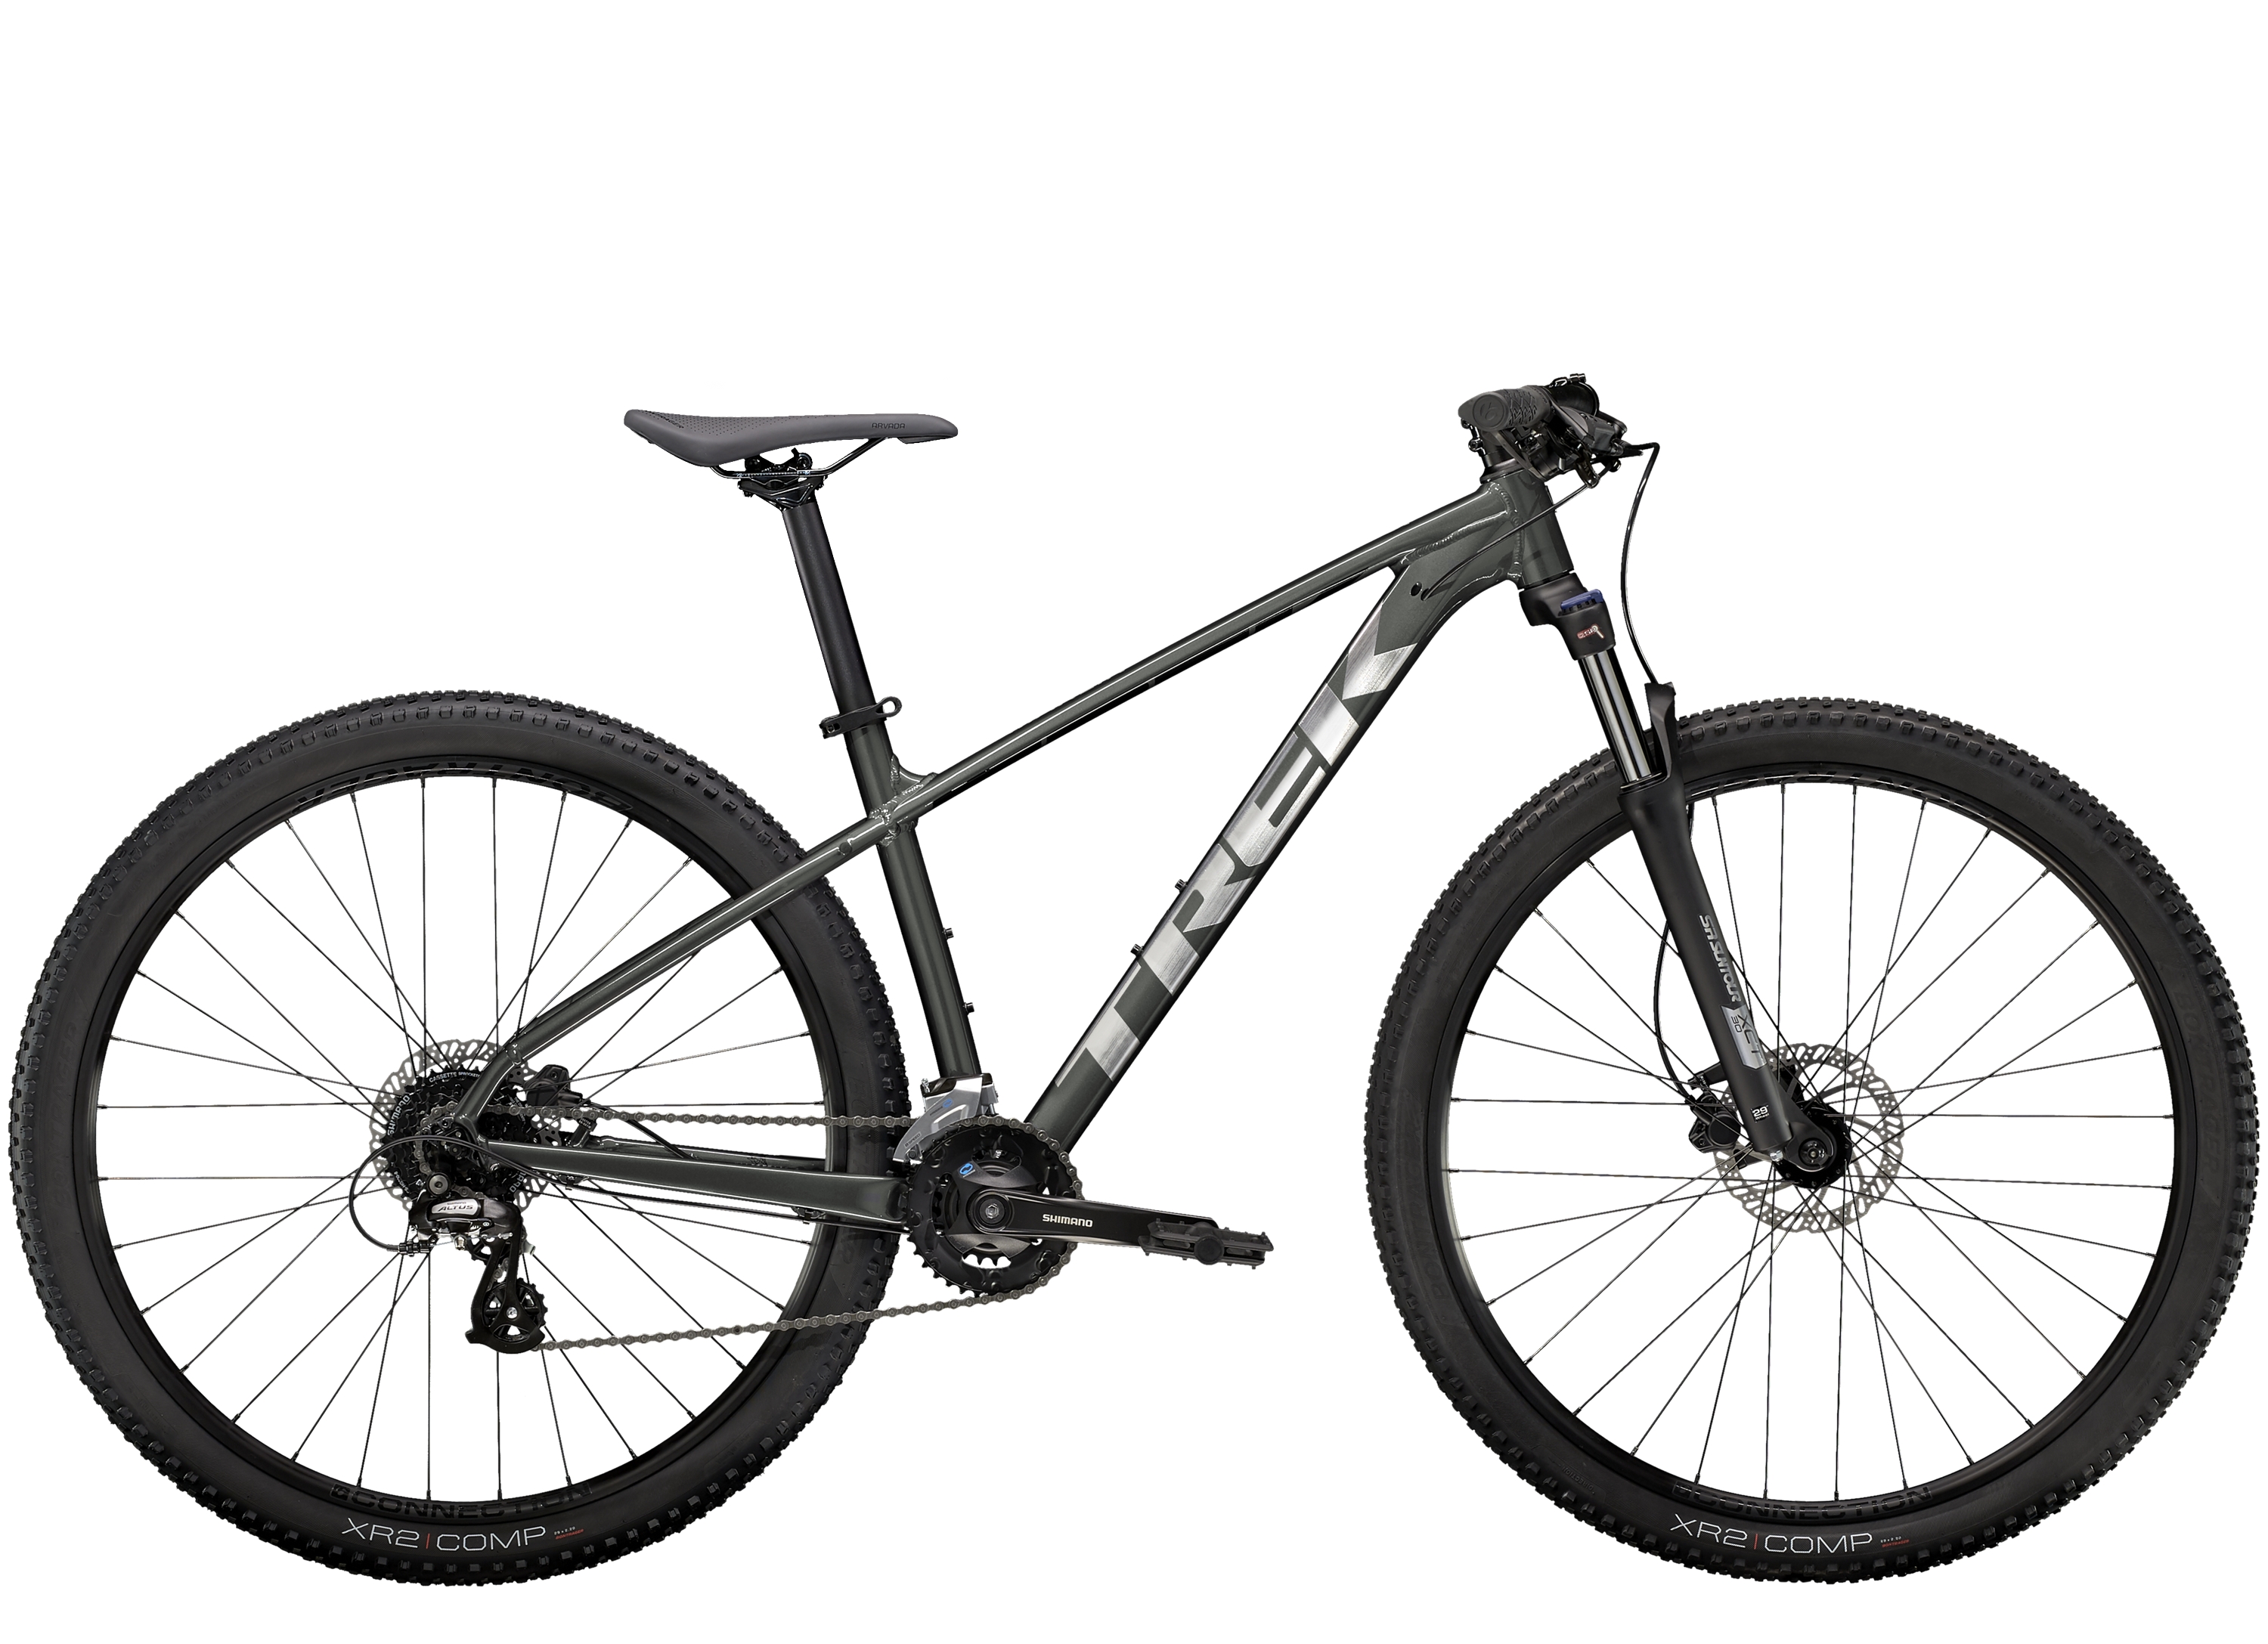 <a href="https://cycles-clement.be/product/marlin-5-xxl-lithium-grey/">MARLIN 5 XXL LITHIUM GREY</a>